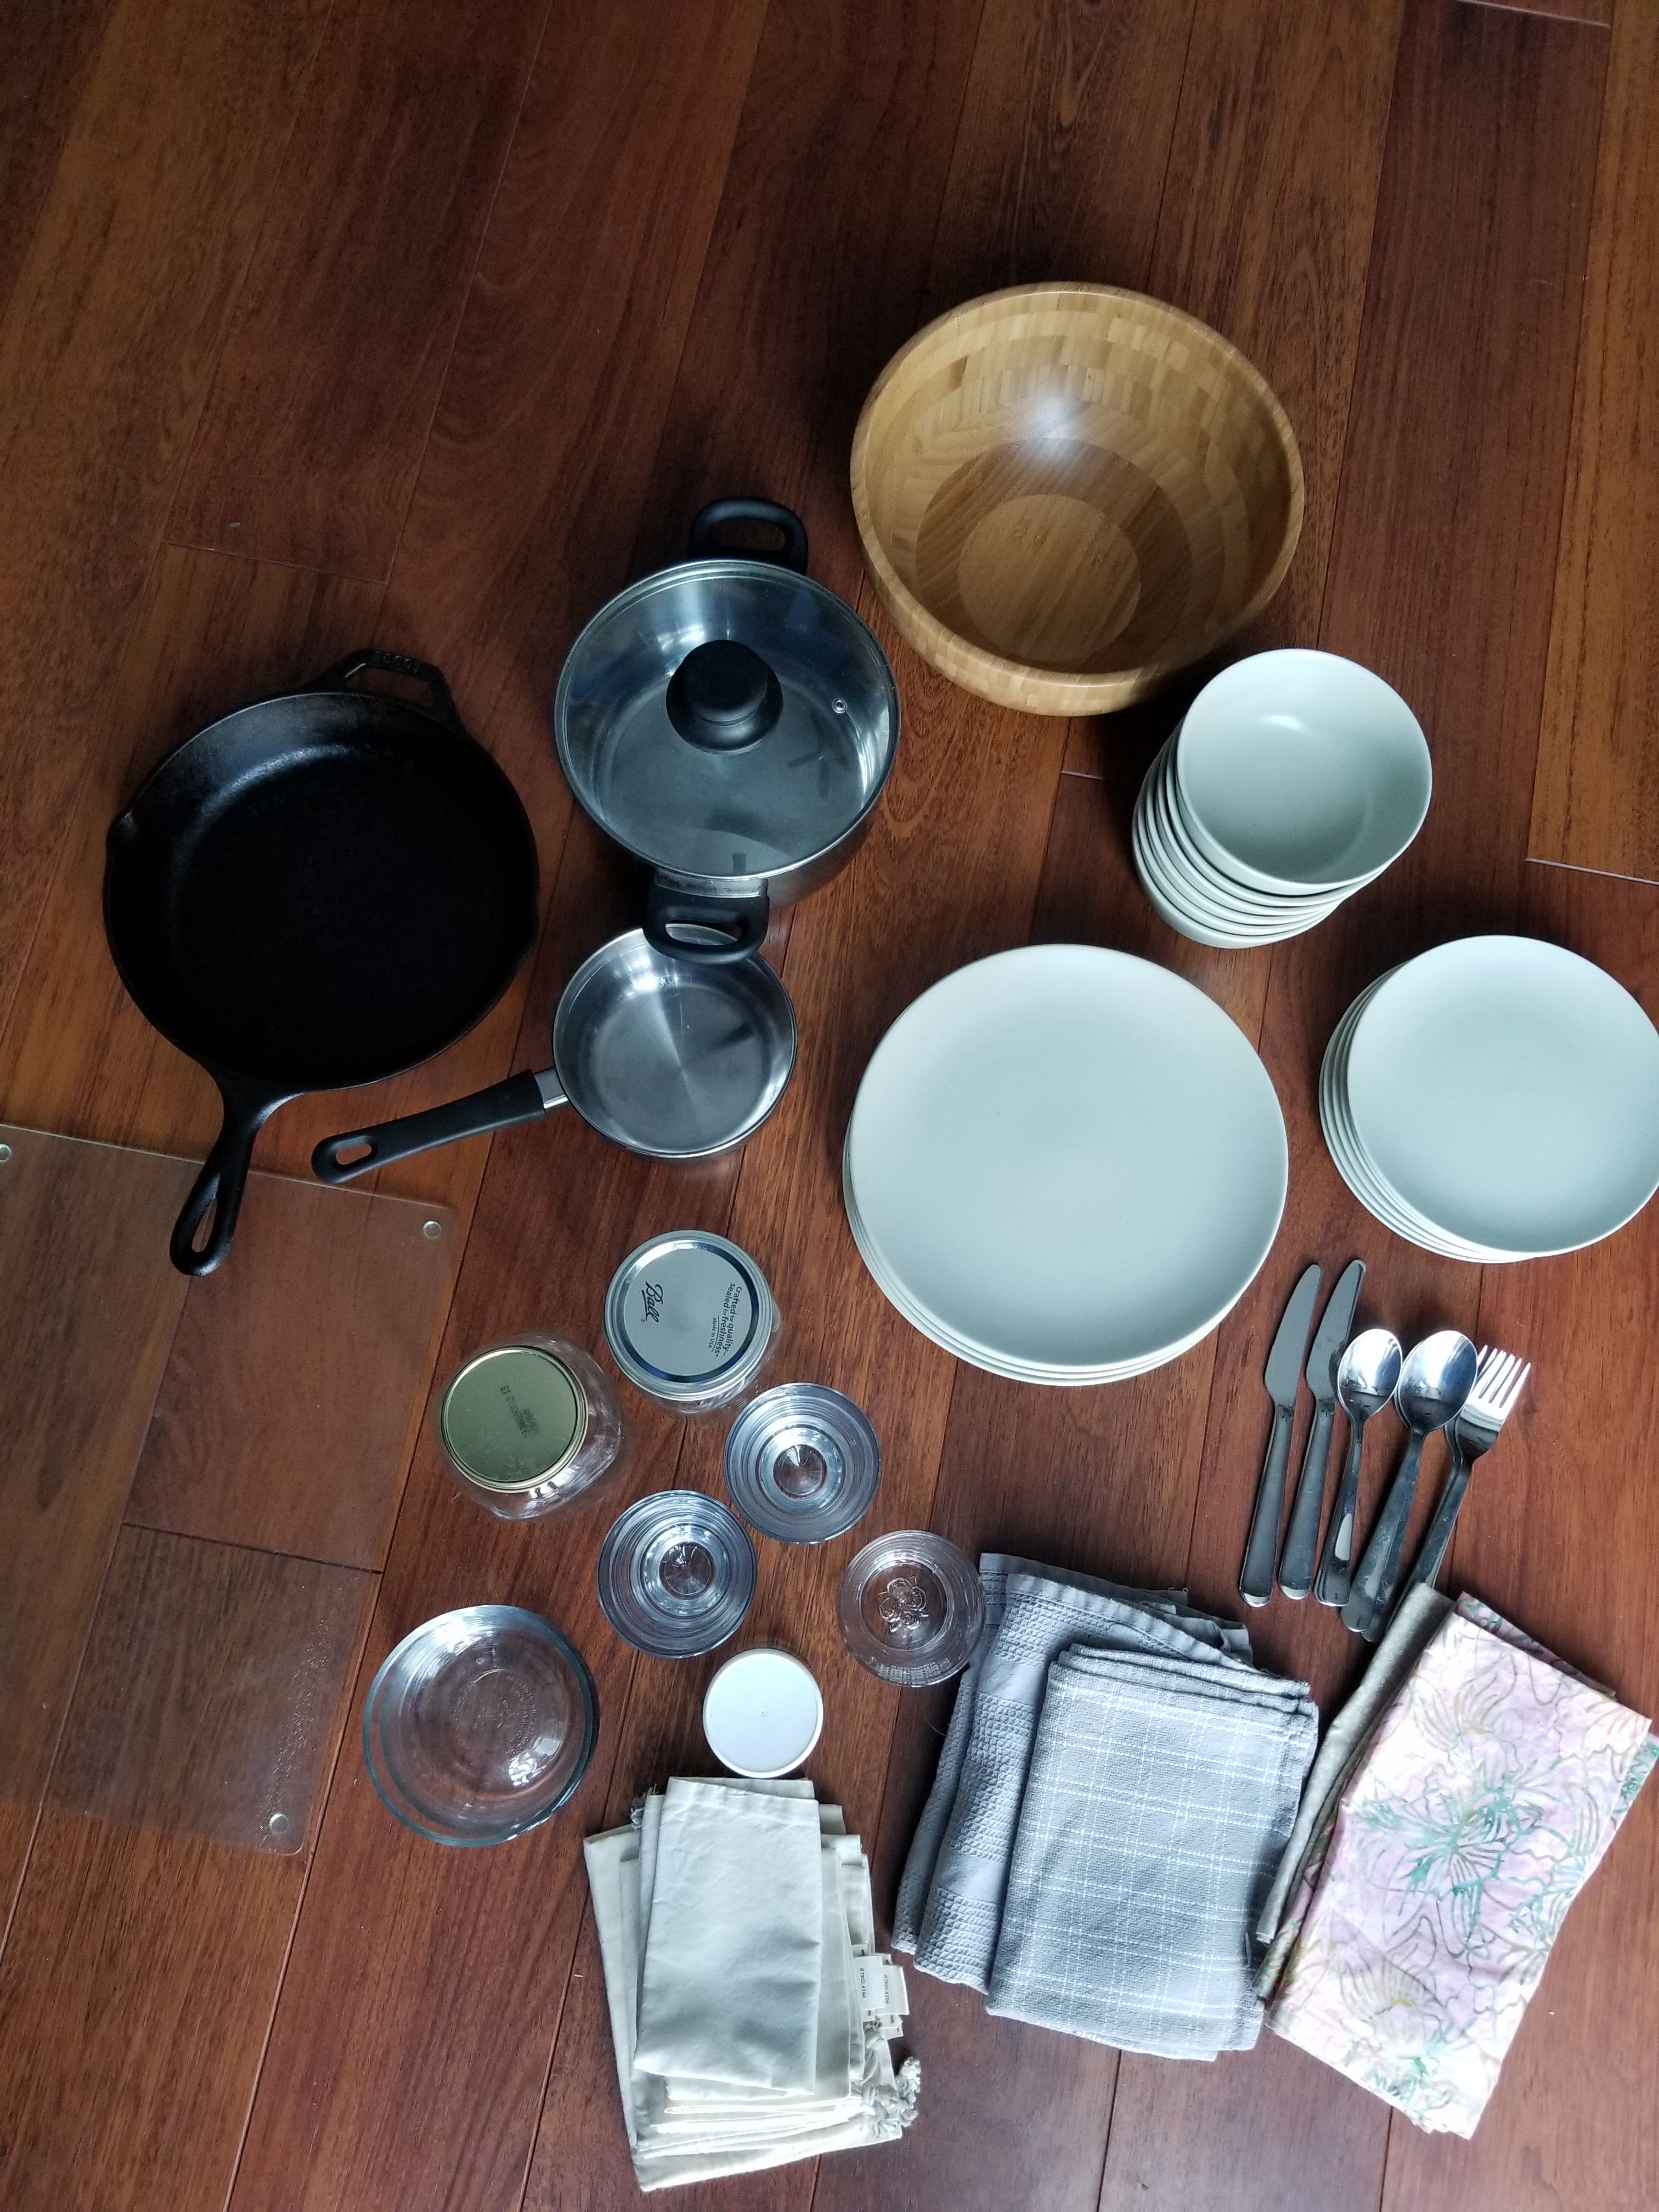 Kitchen things: dishes- plates, bowls, jars, cutting board, cast iron pan, towels etc